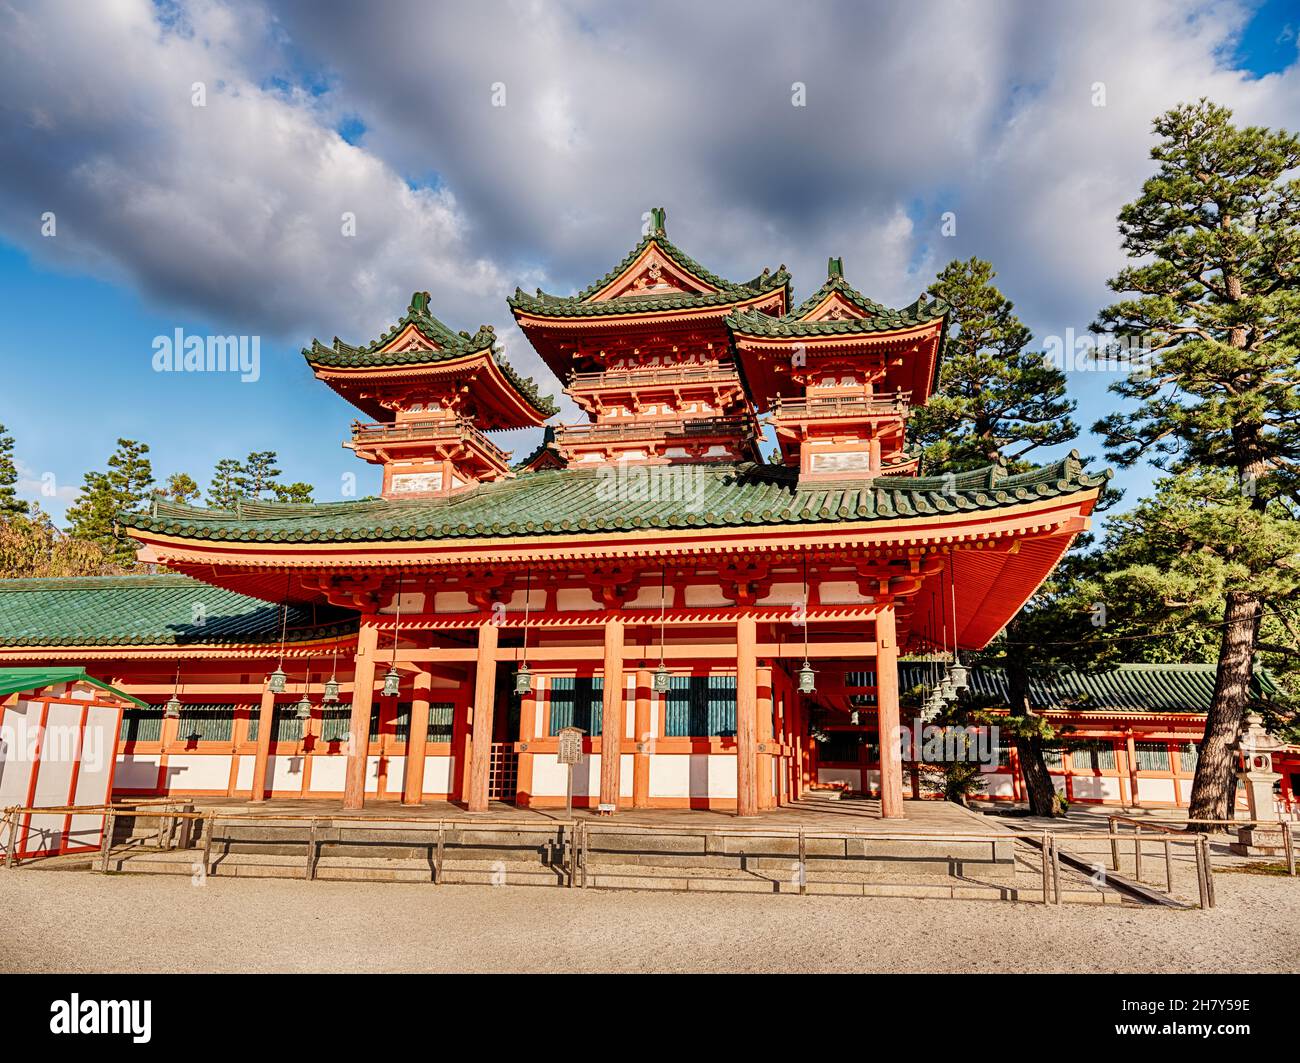 Ominous clouds spread out over the top of the traditional Heian temple in Kyoto, Japan. Stock Photo